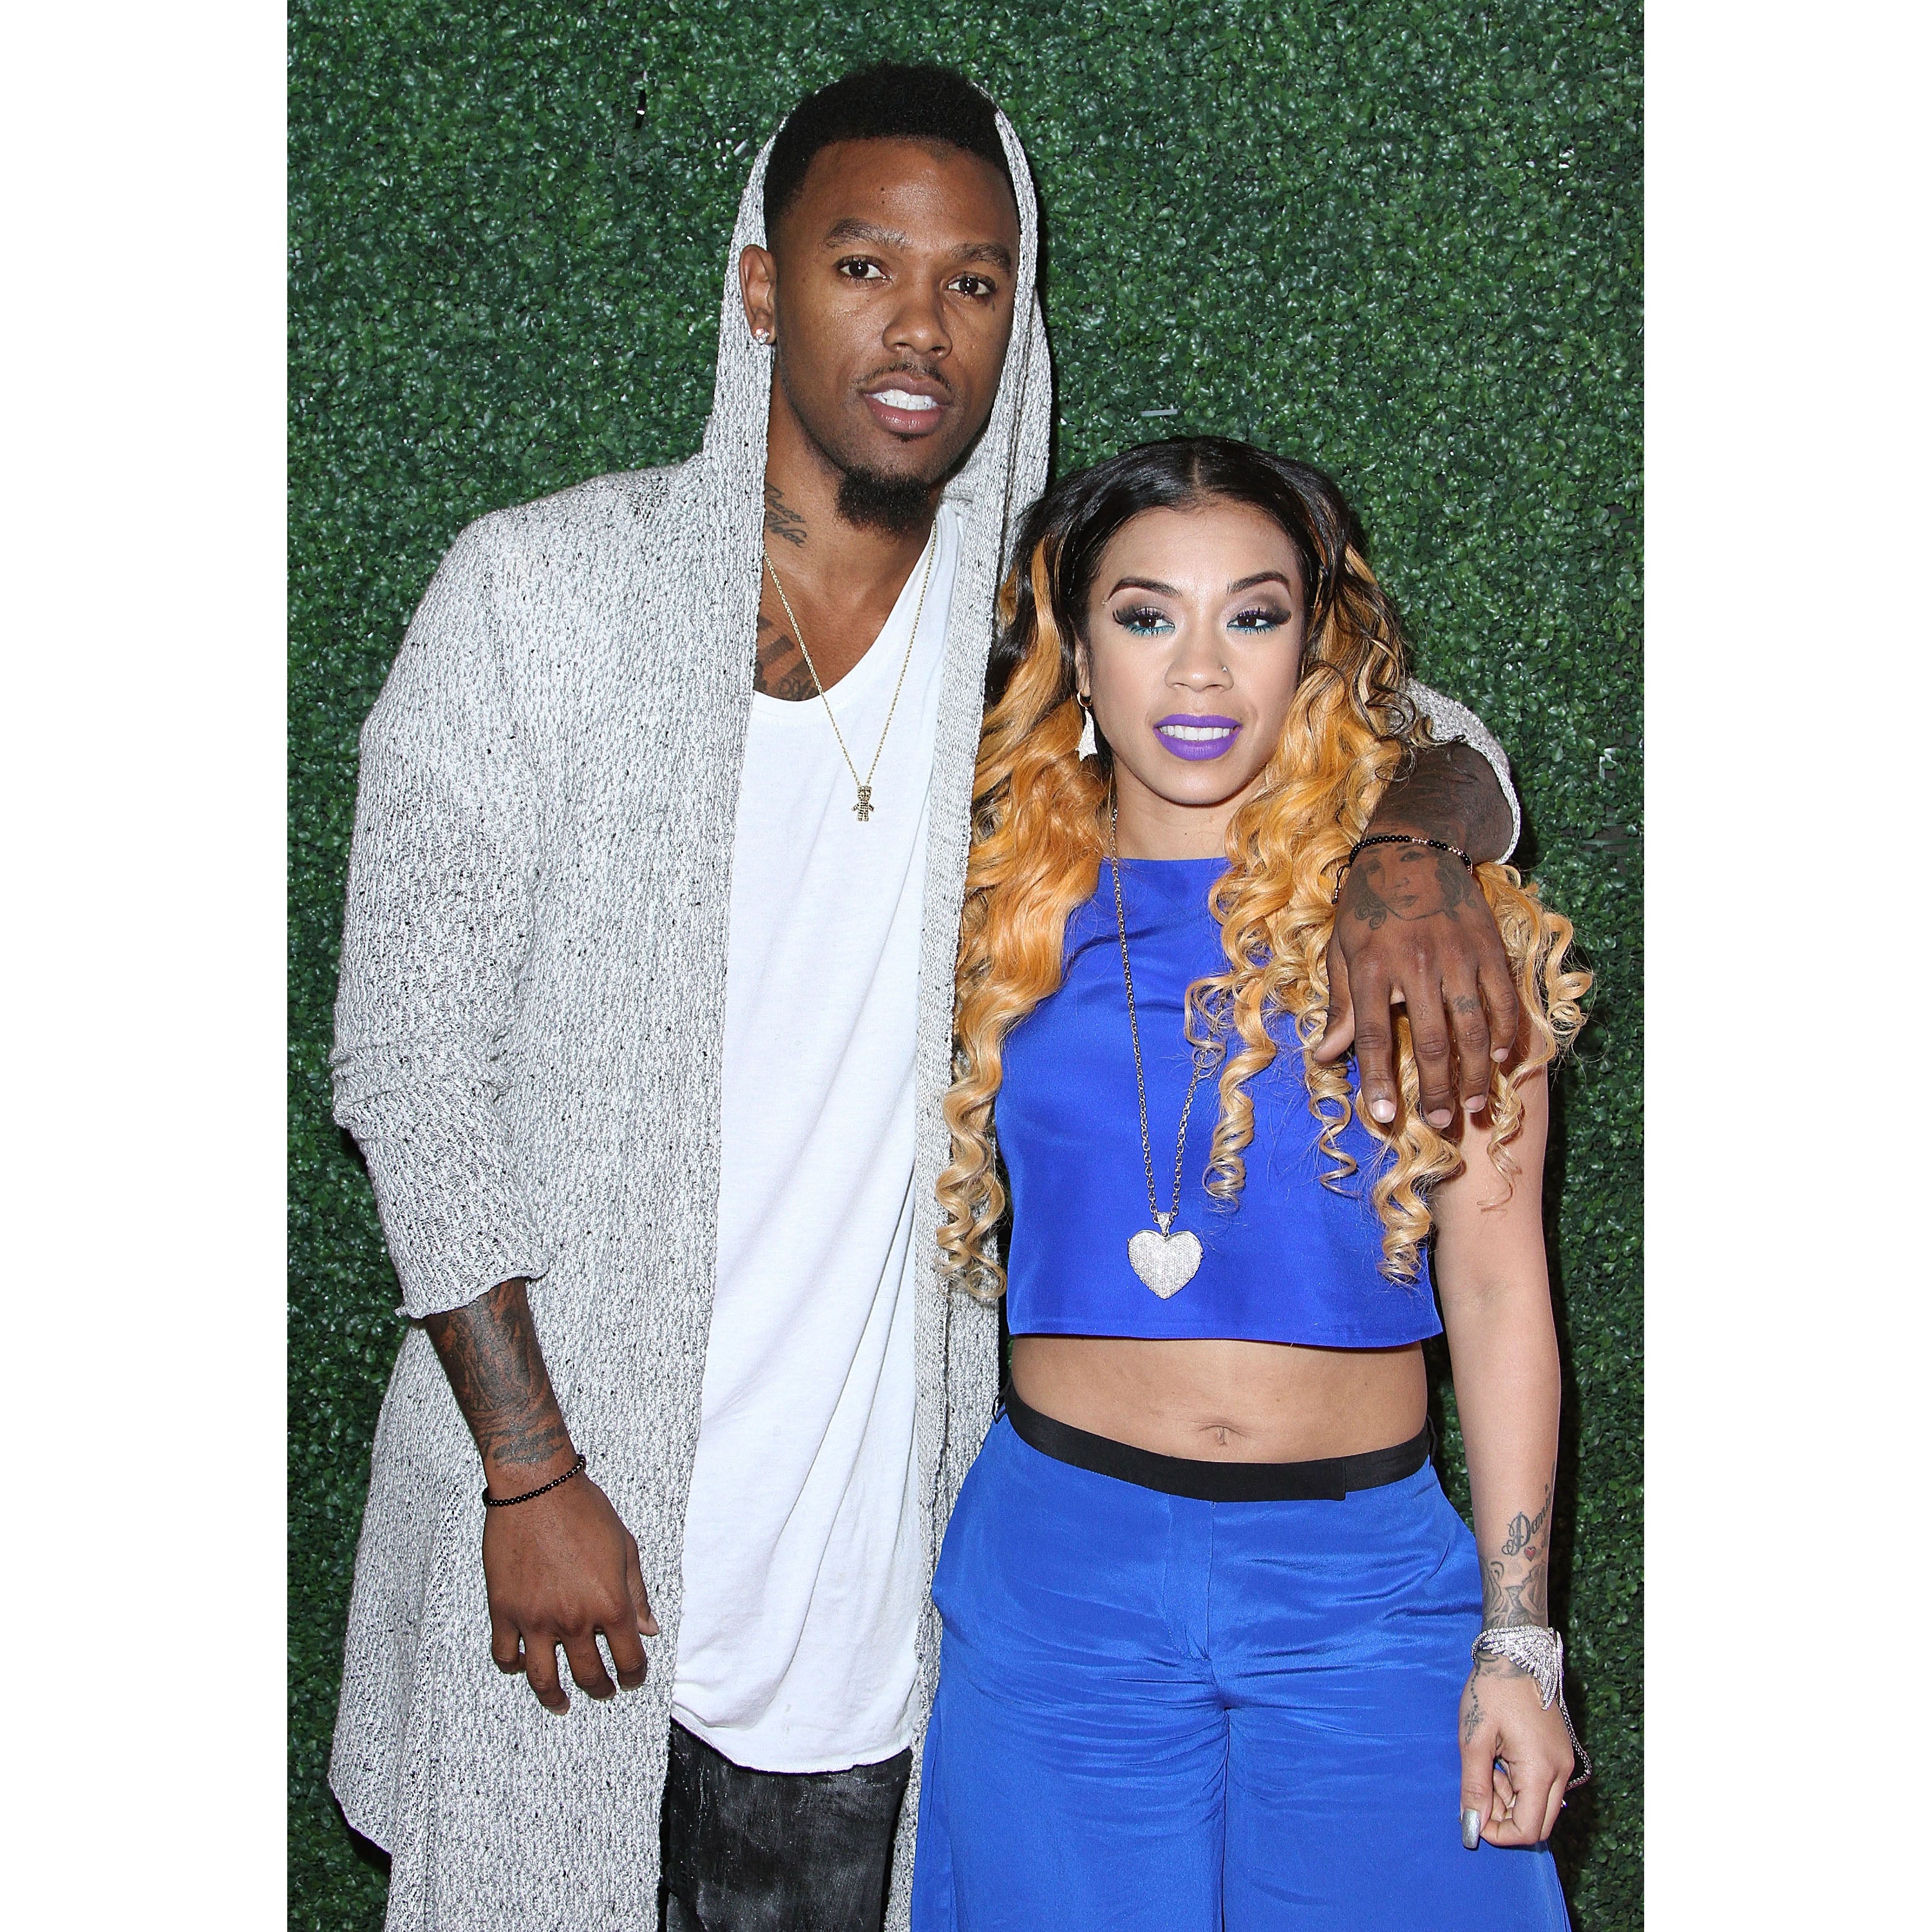 Keyshia Cole And Estranged Husband Attempt To Rebuild Their Relationship On 'Love & Hip Hop Hollywood'
